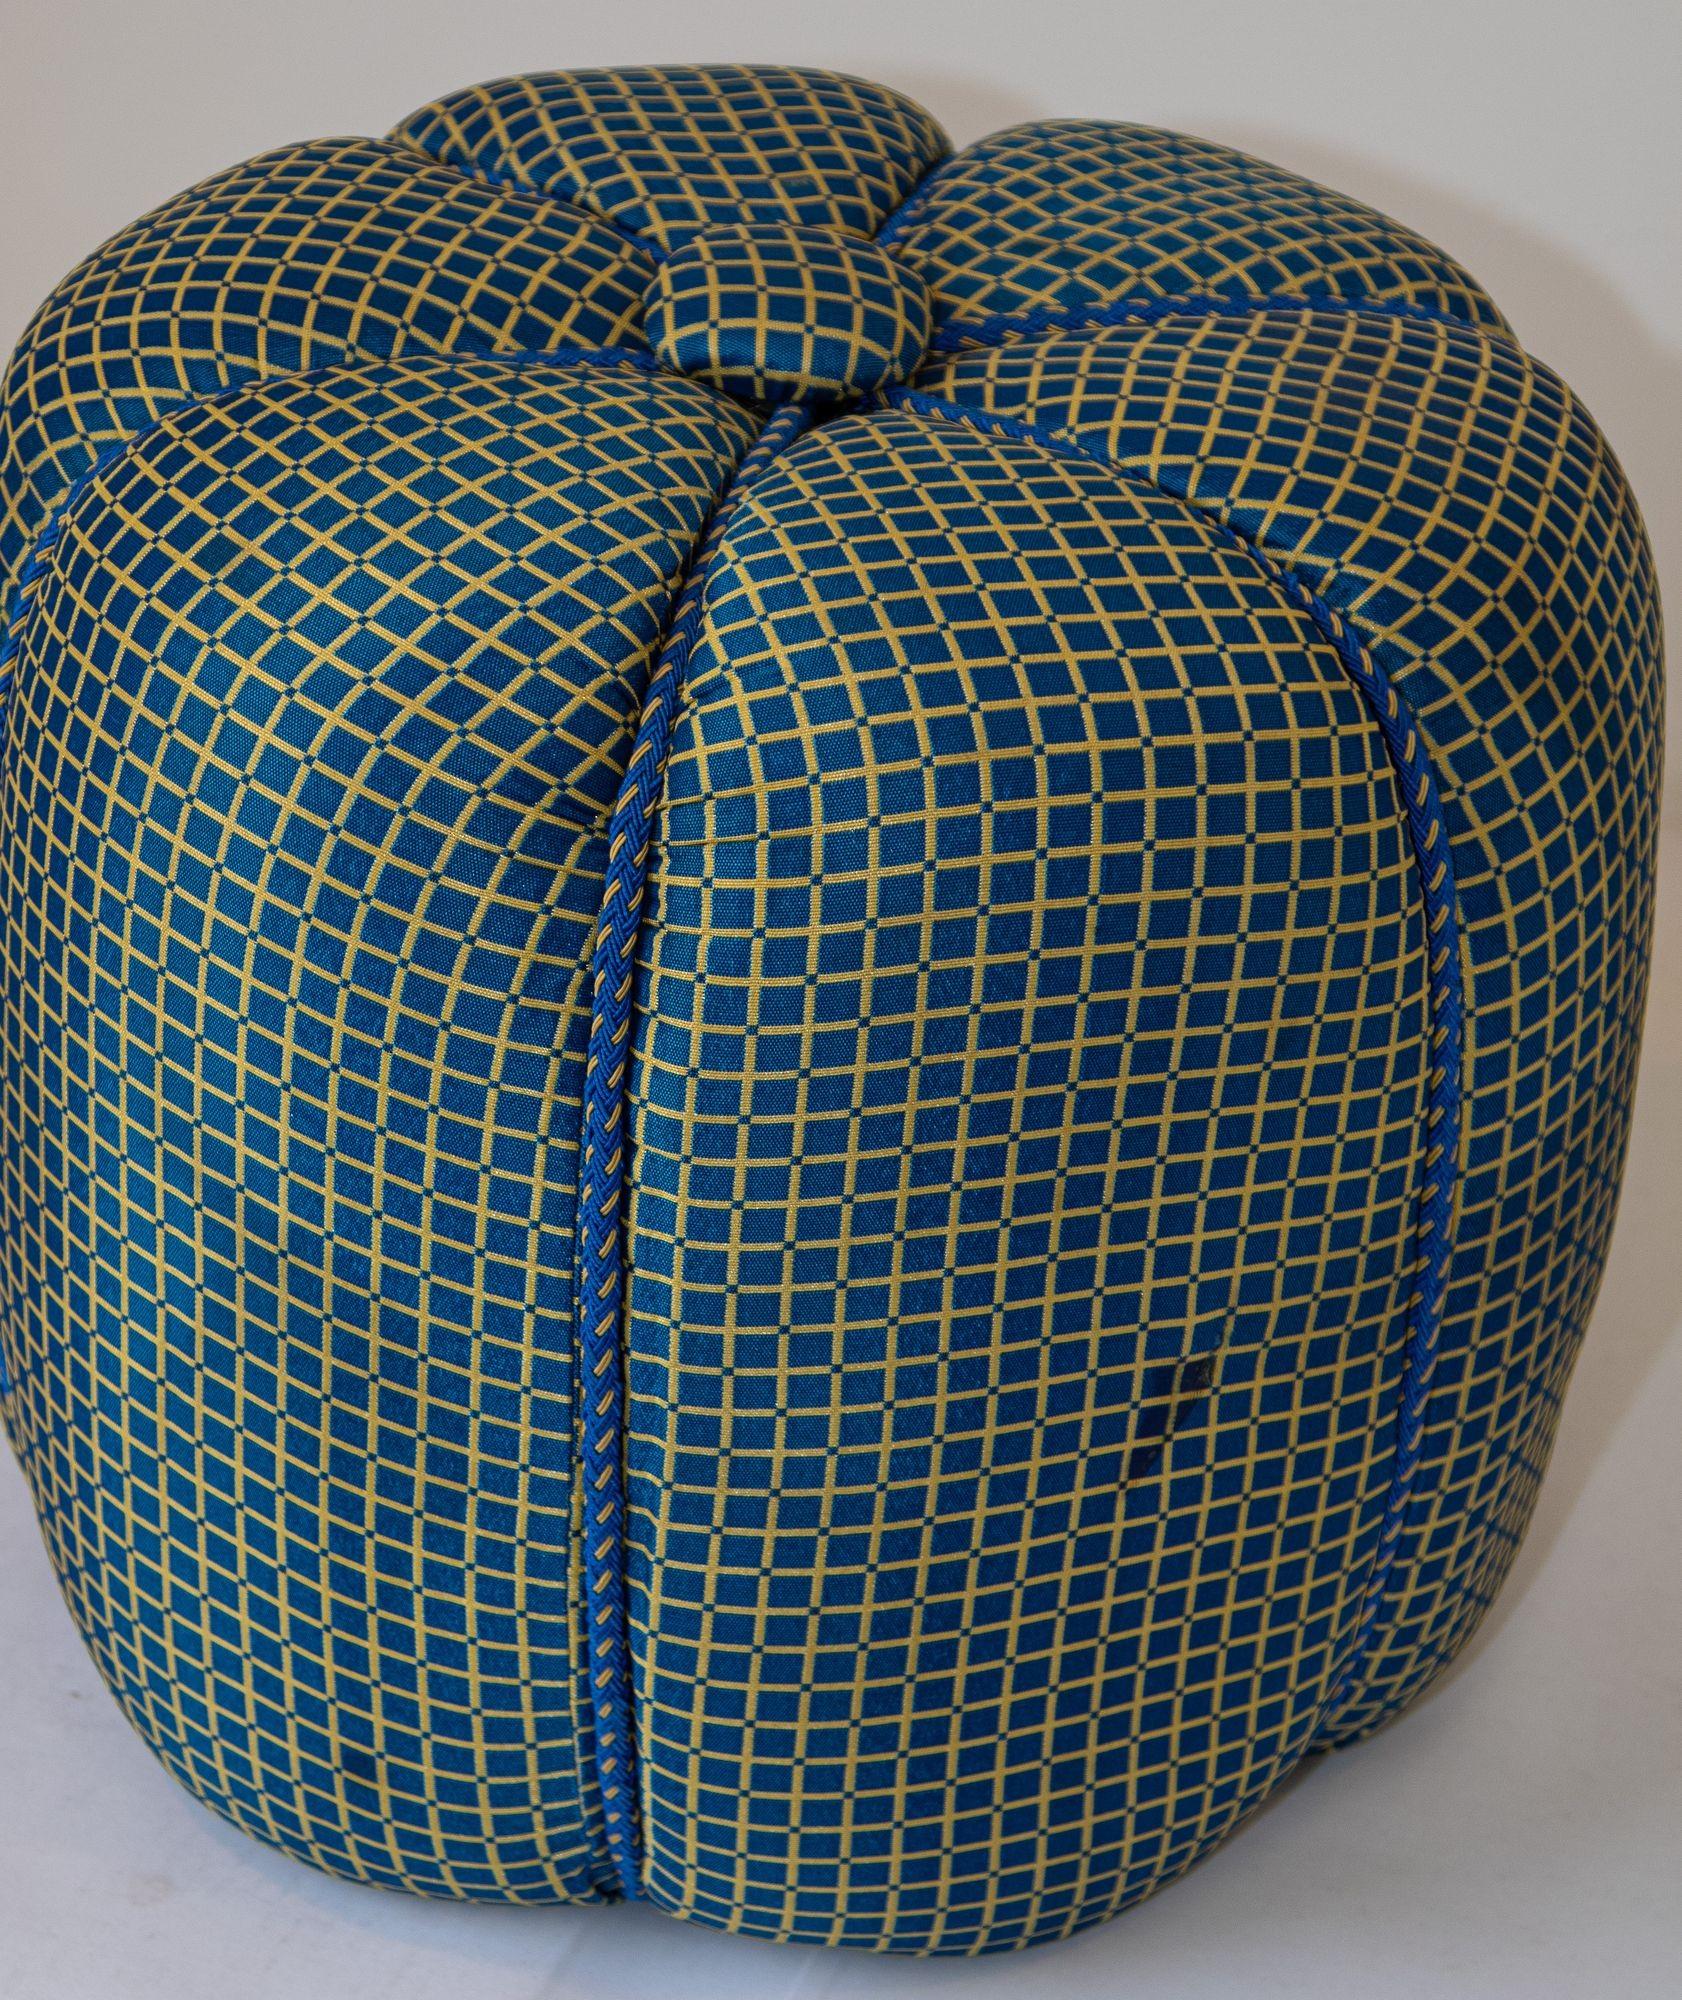 Vintage Art Deco style pouf  in turquoise upholstered round stool.
Round stool in Turquoise fabric upholstery in Art Deco style.
Vintage Moroccan little pouf hassock, upholstered footstool circular ottoman.
This versatile accent piece, pouf is